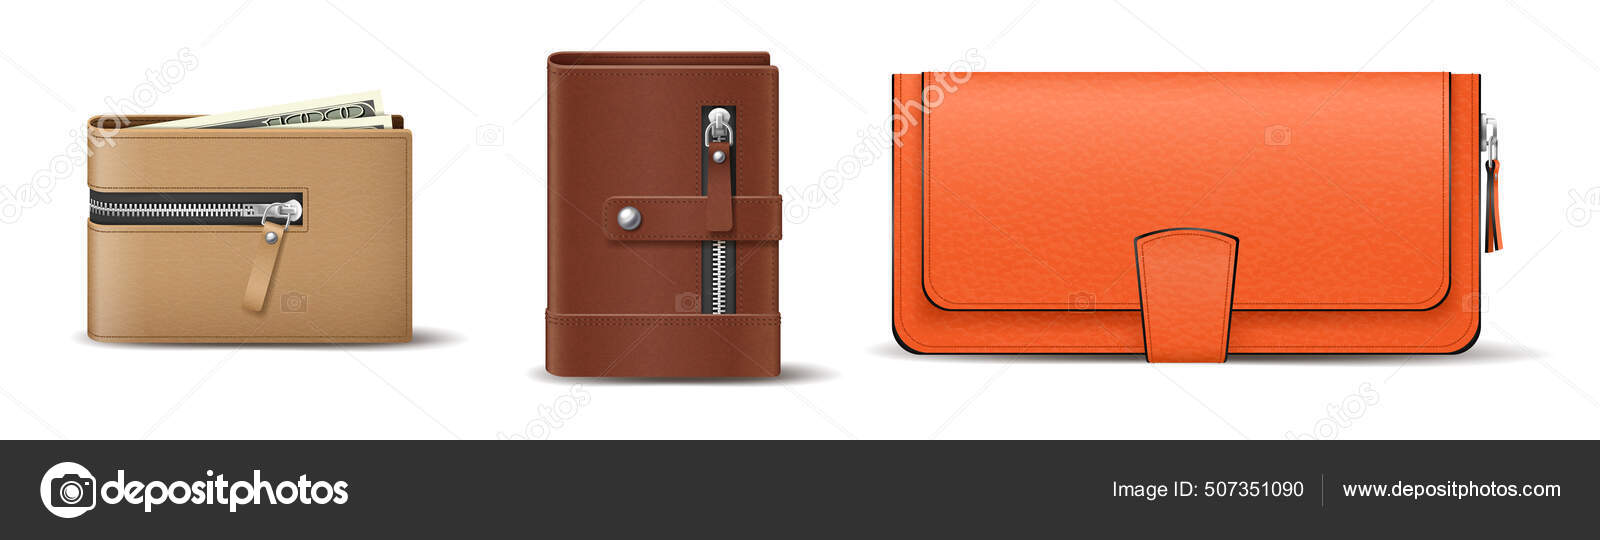 Leather Bag For Storing The Money And Coins Stock Photo - Download